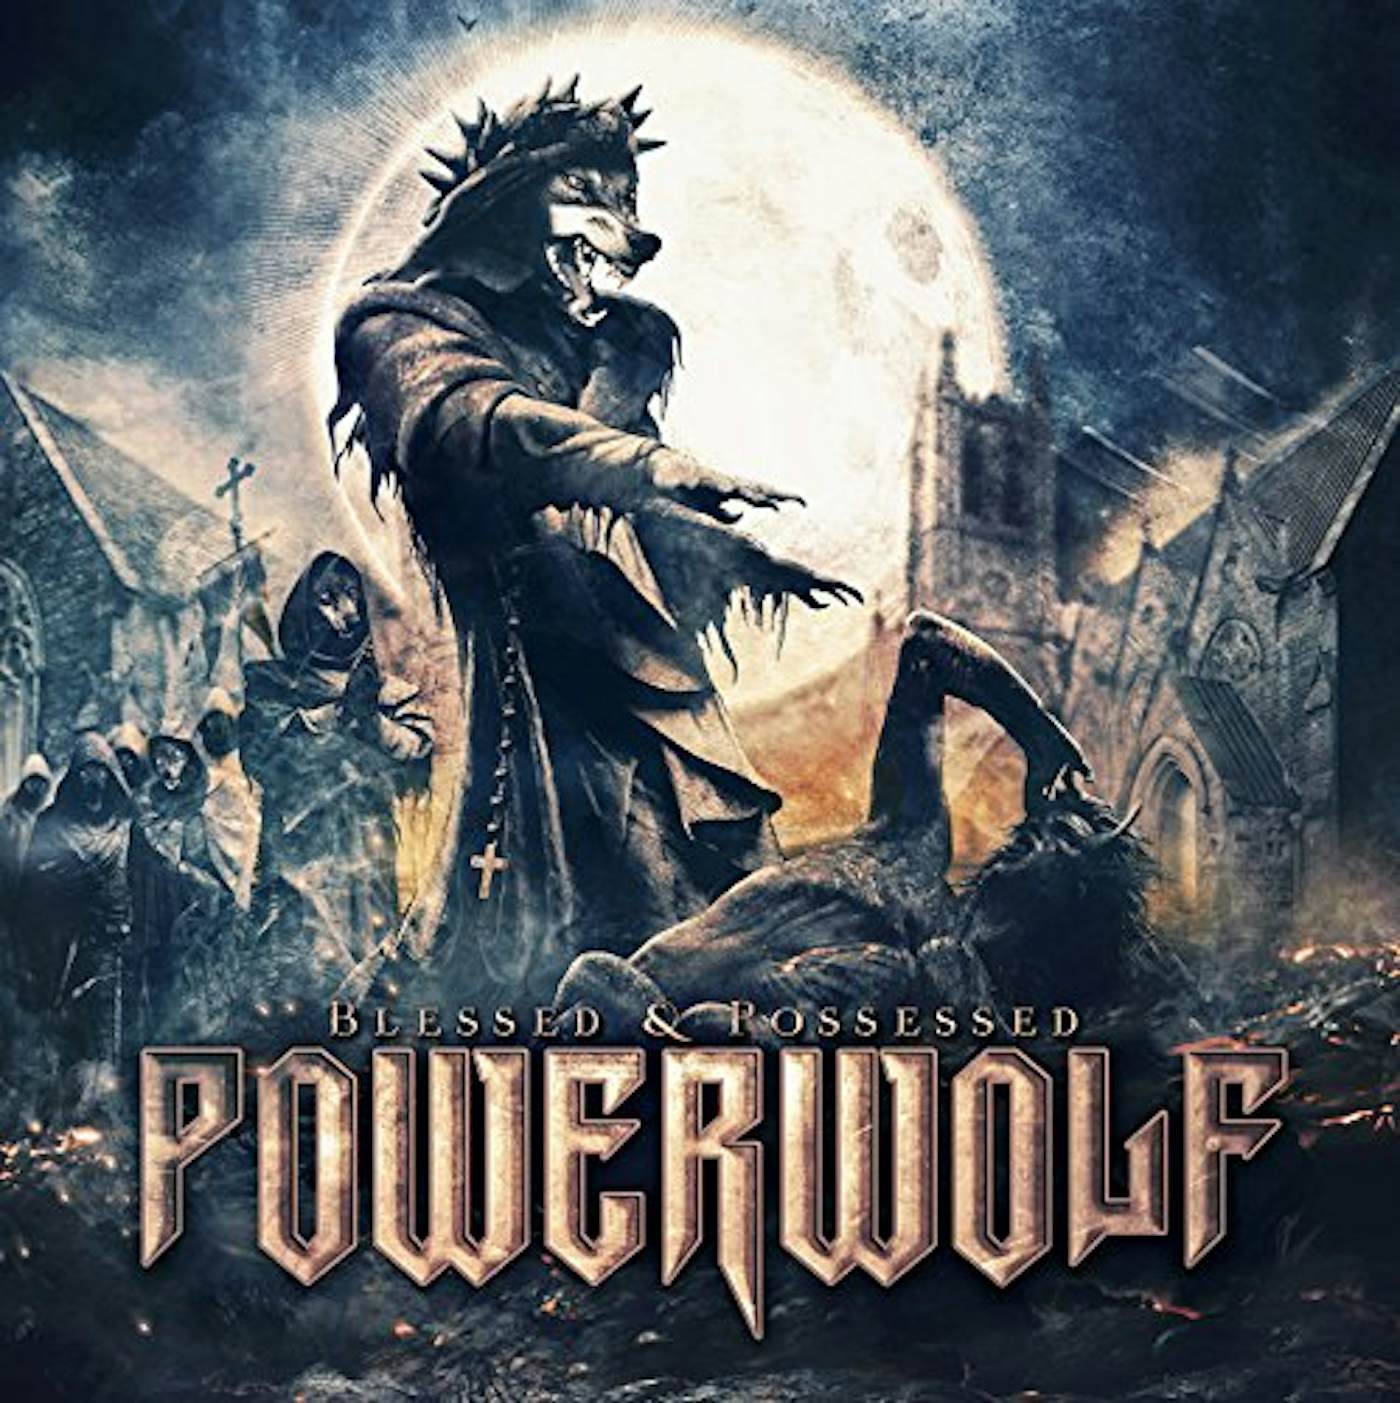 Powerwolf Posters for Sale